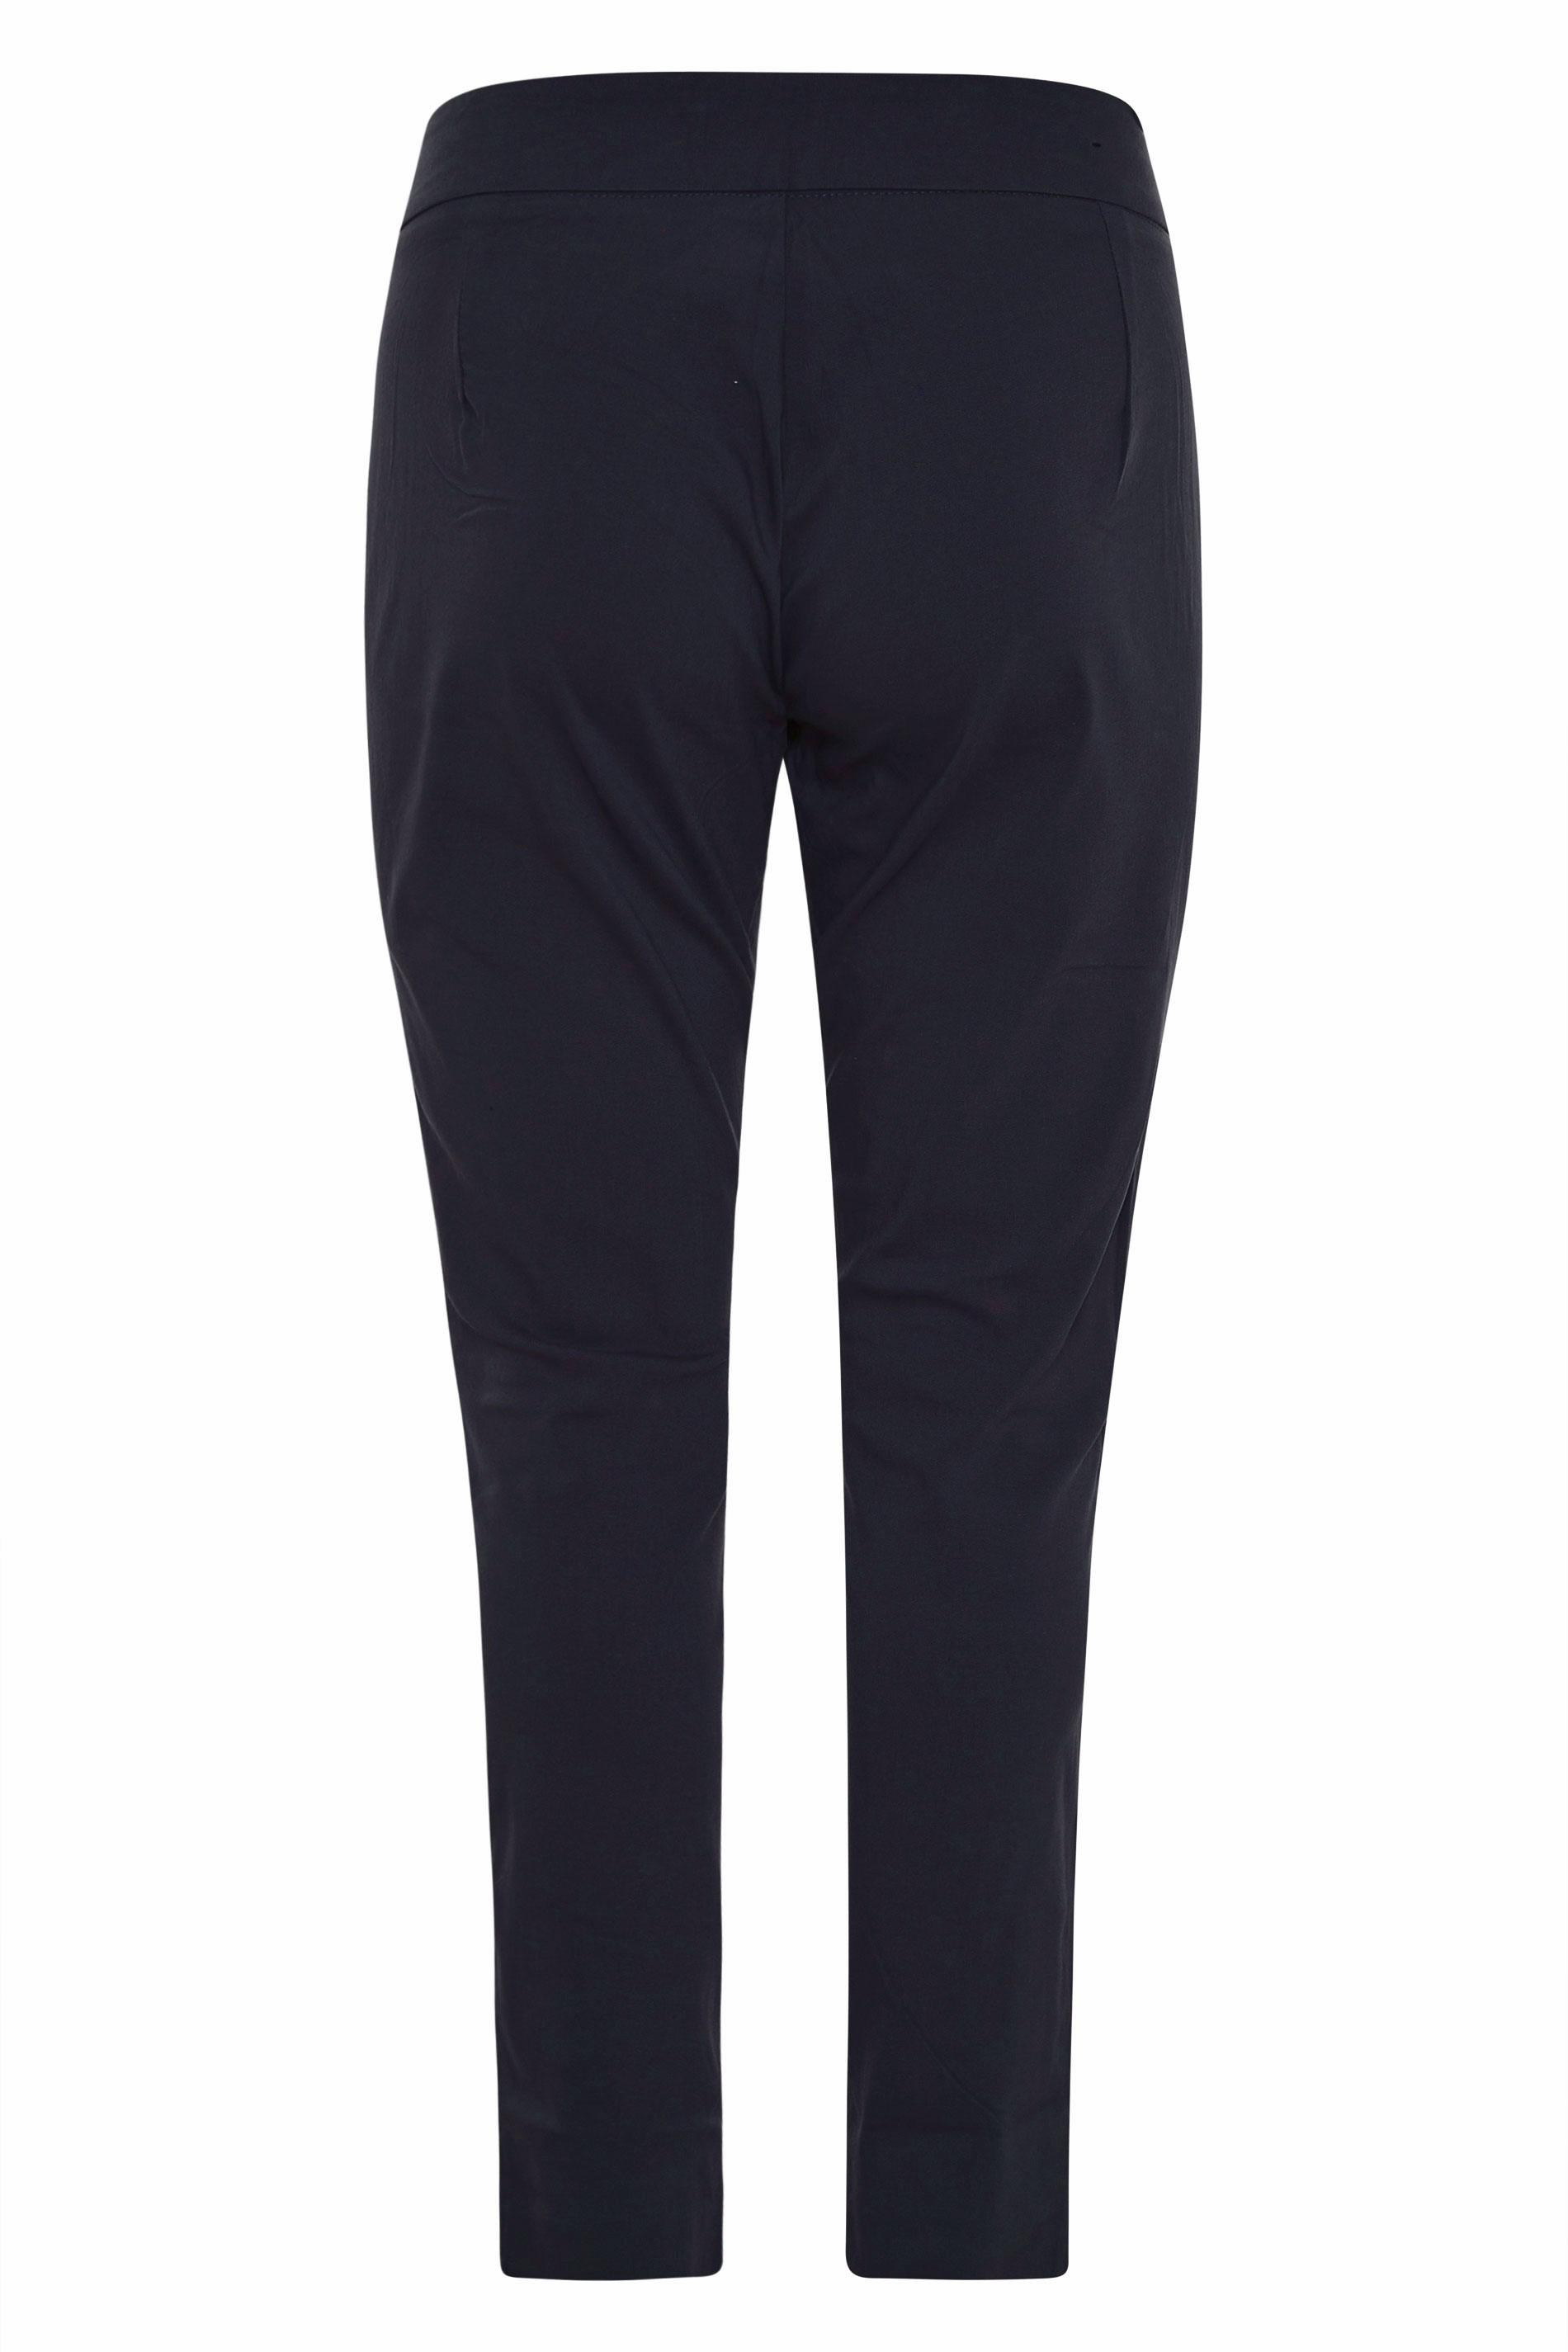 Navy Blue Bengaline Stretch Trousers | Yours Clothing